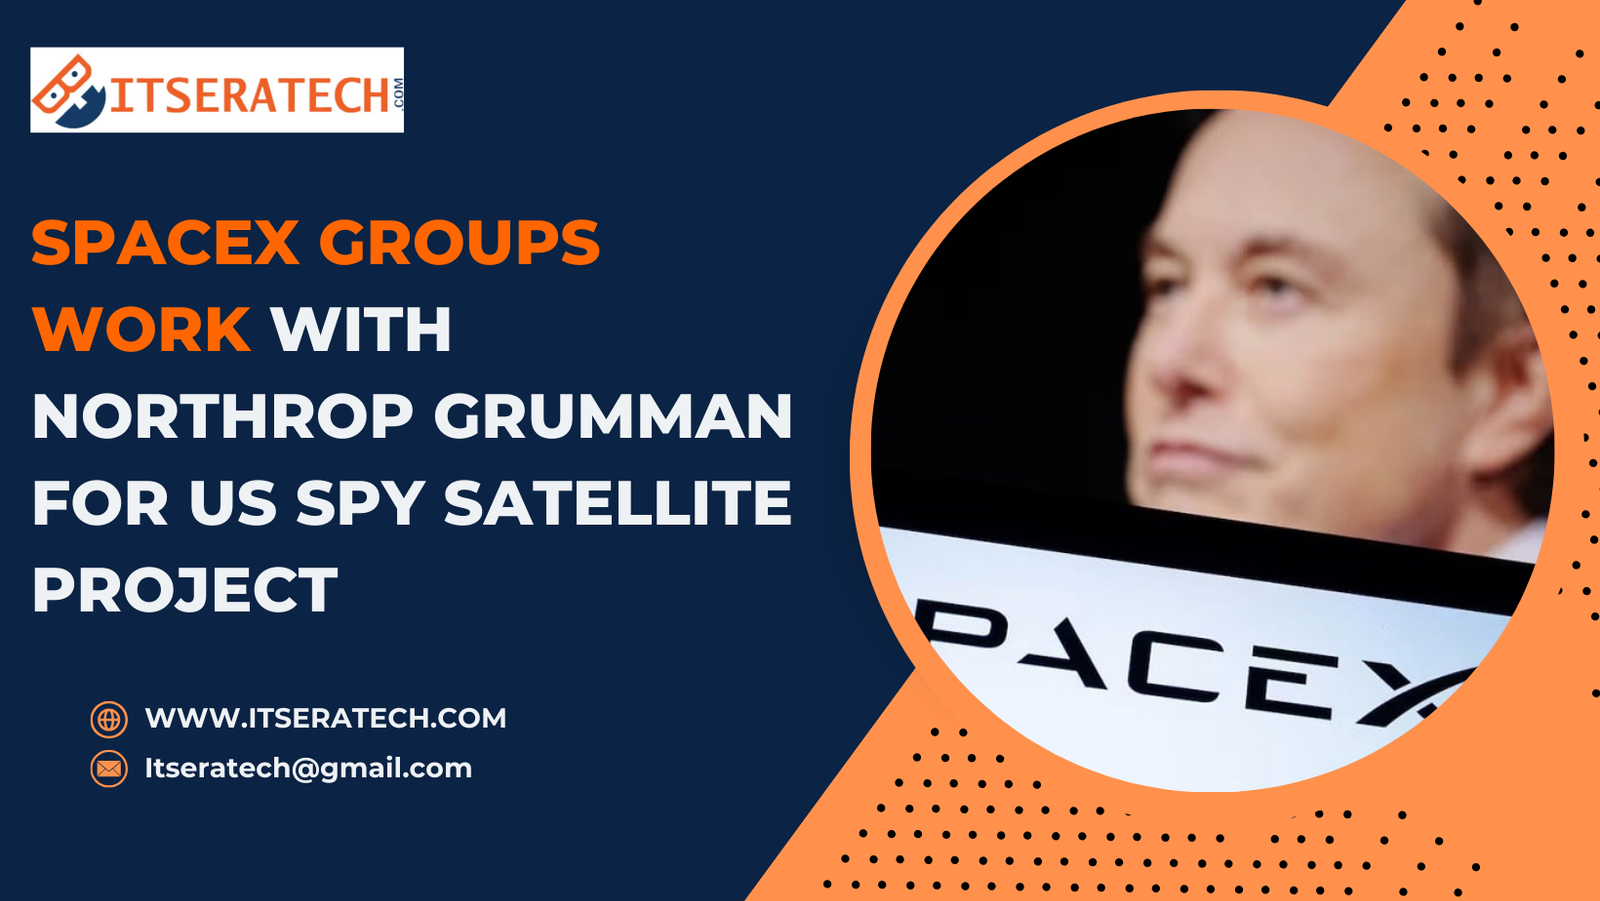 SpaceX Groups Work With Northrop Grumman For US Spy Satellite Project